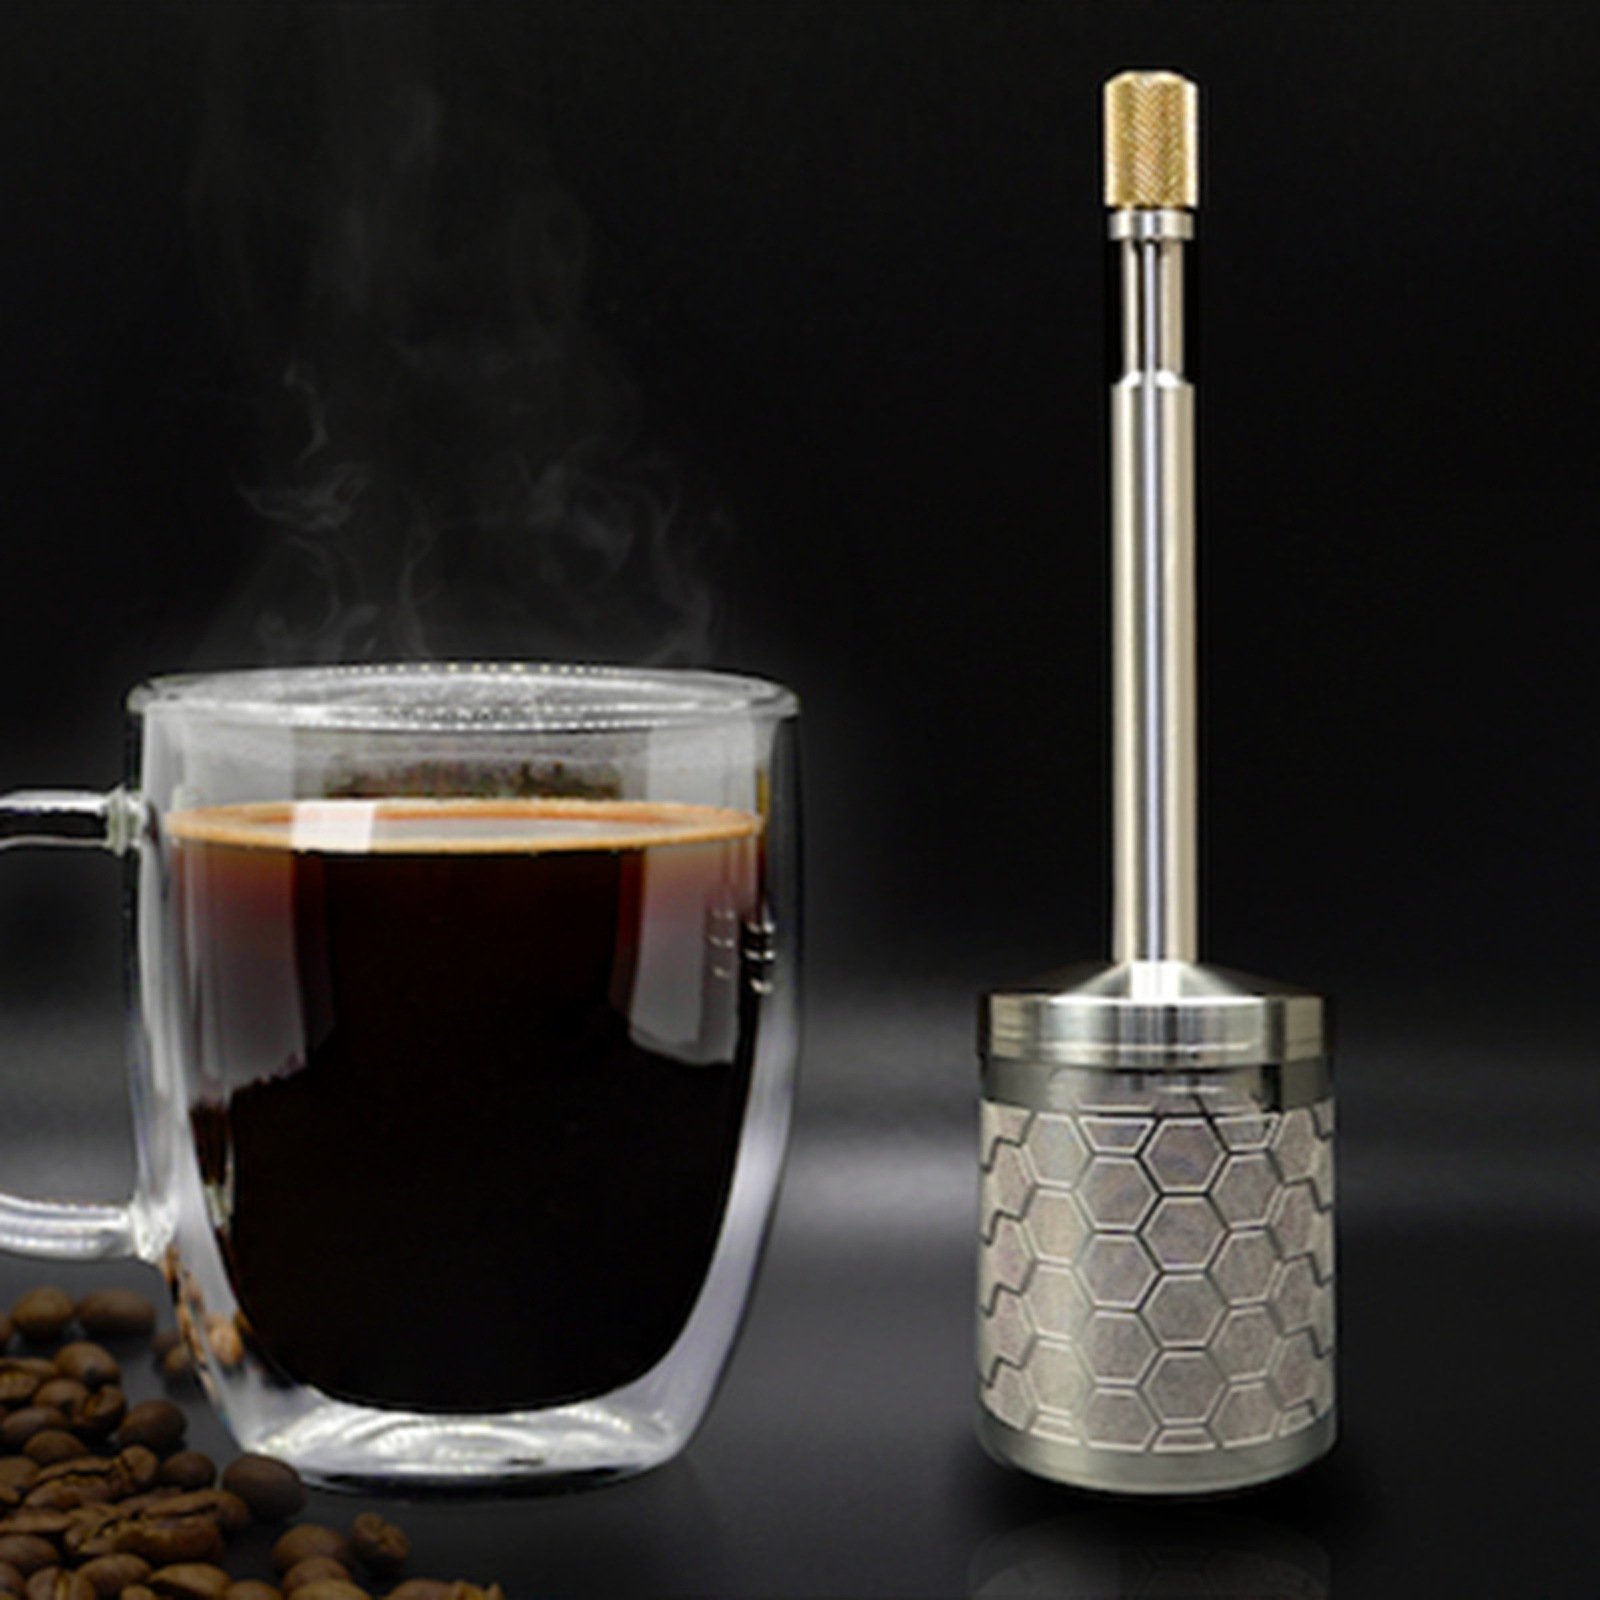 Press Coffee Filter: A new way to brew perfect coffee & tea